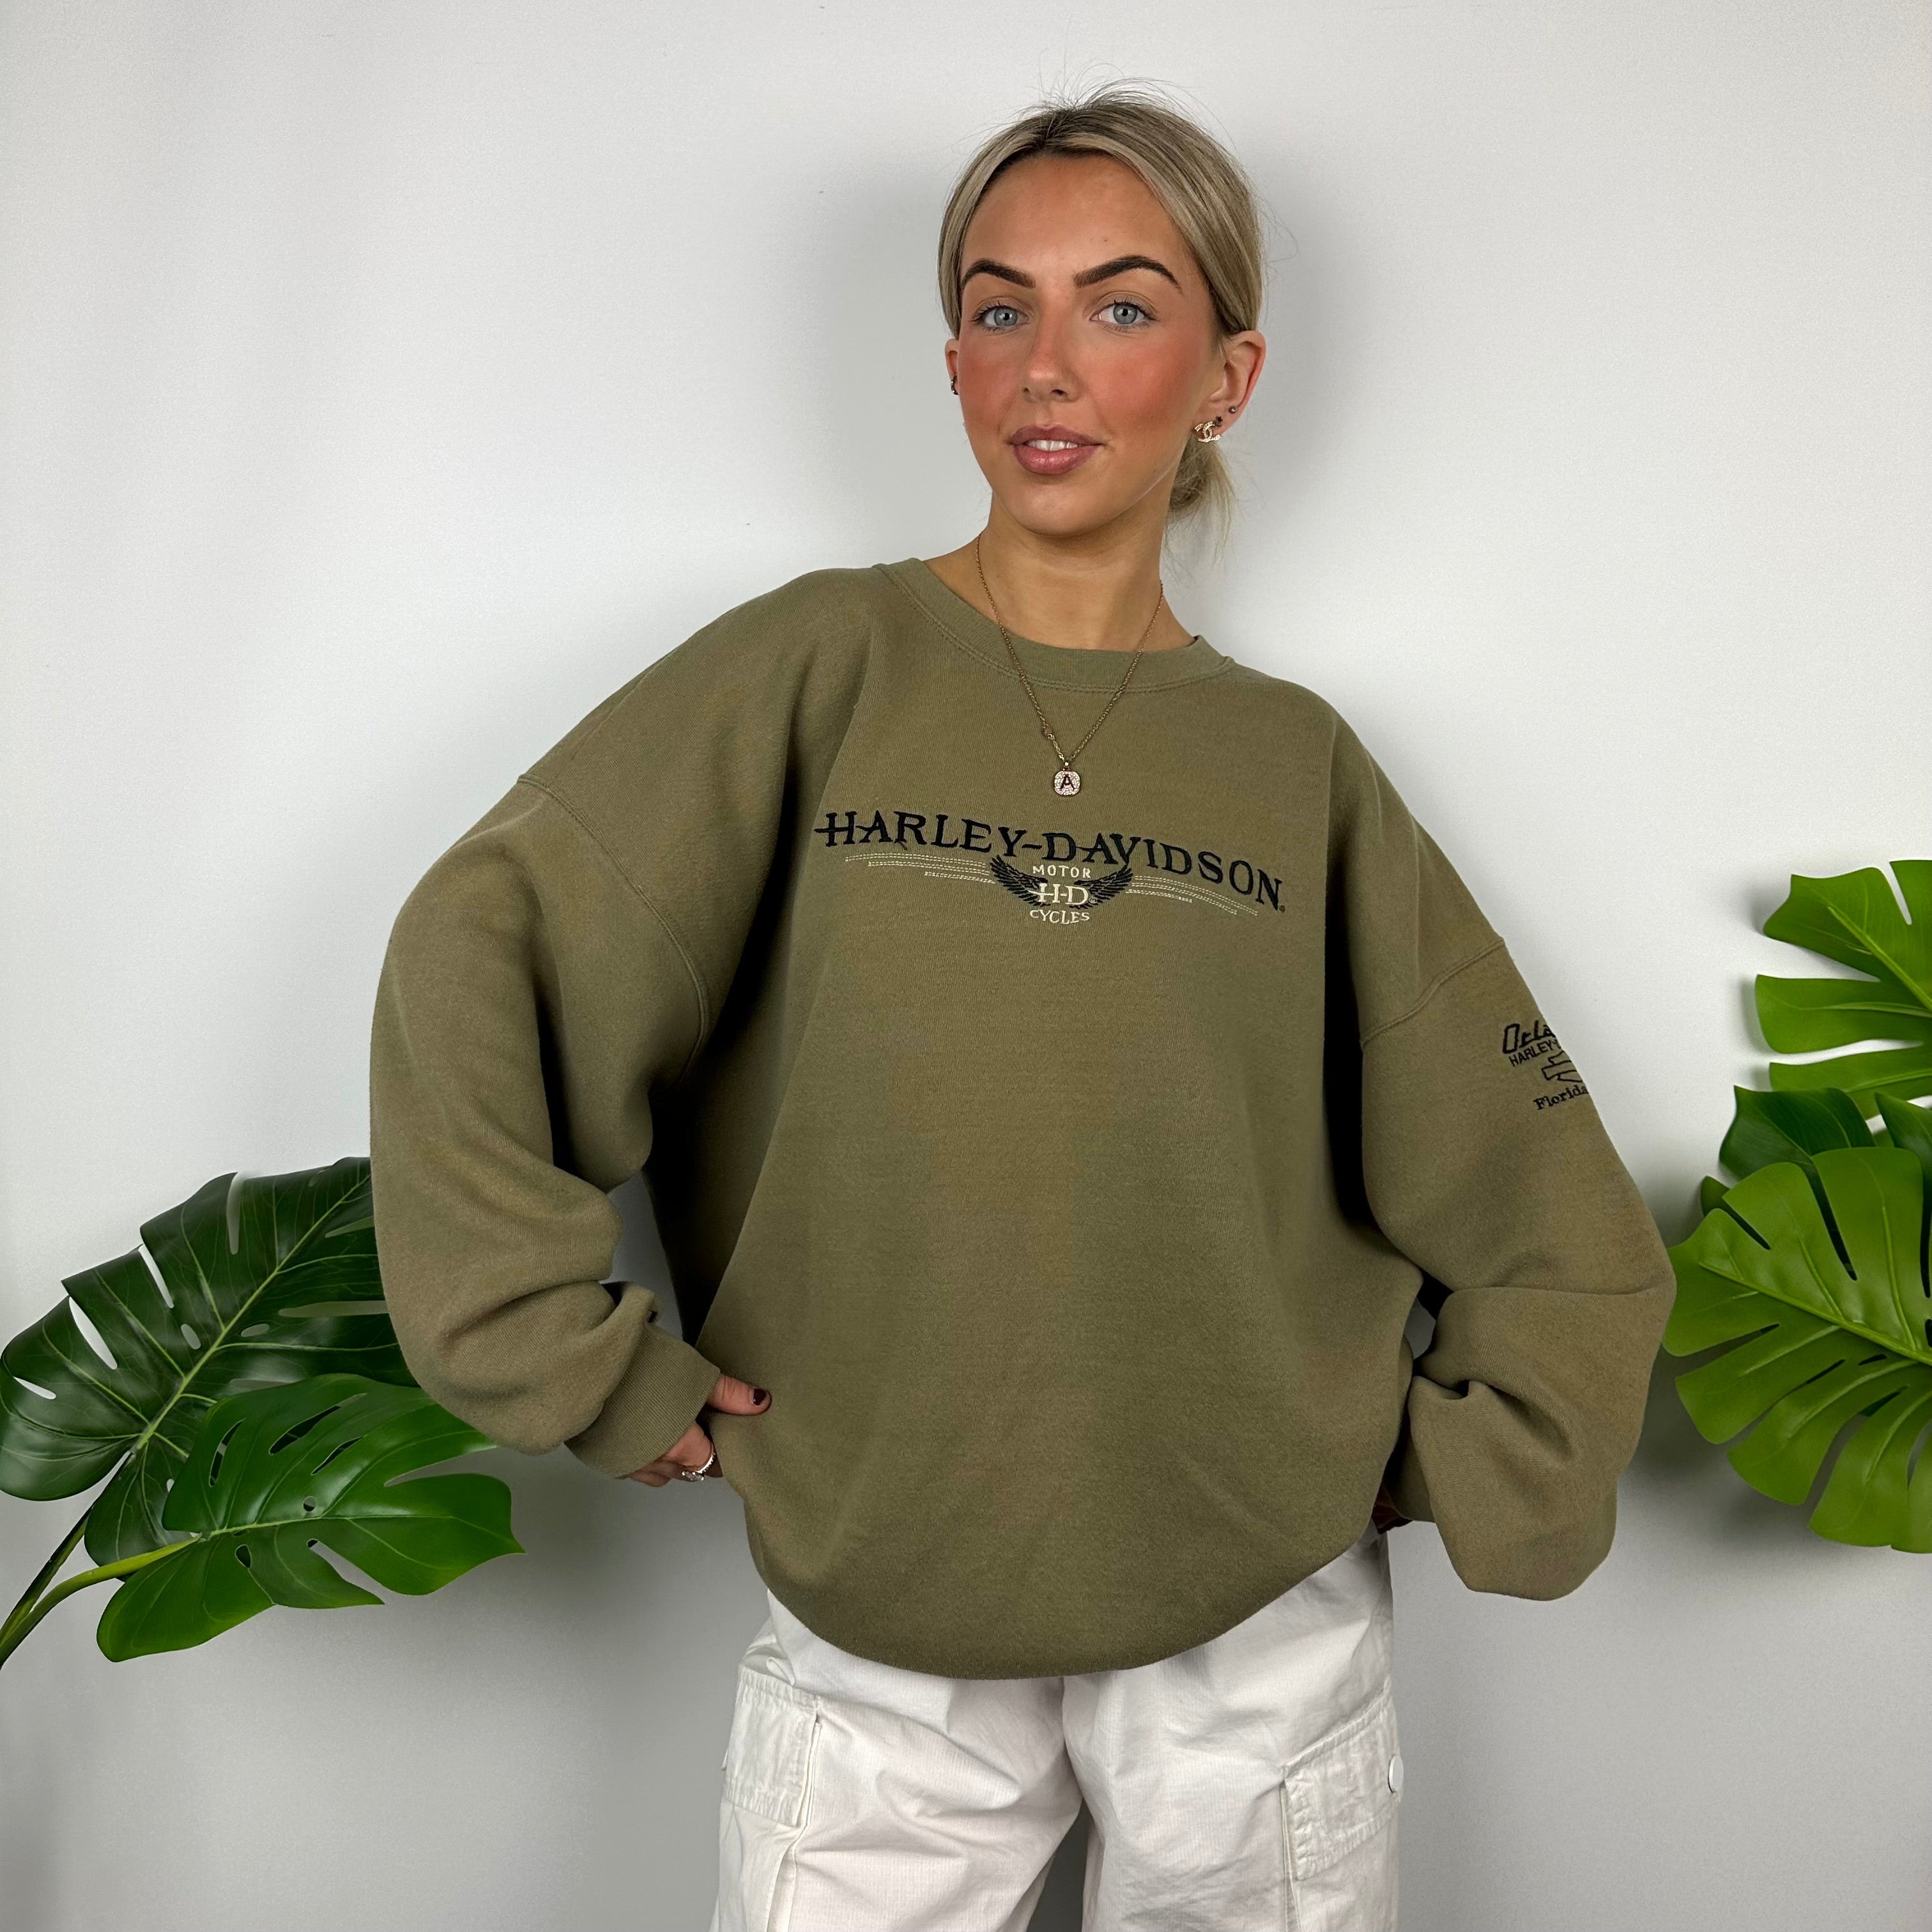 Harley Davidson Khaki Green Embroidered Spell Out Sweatshirt (XL)